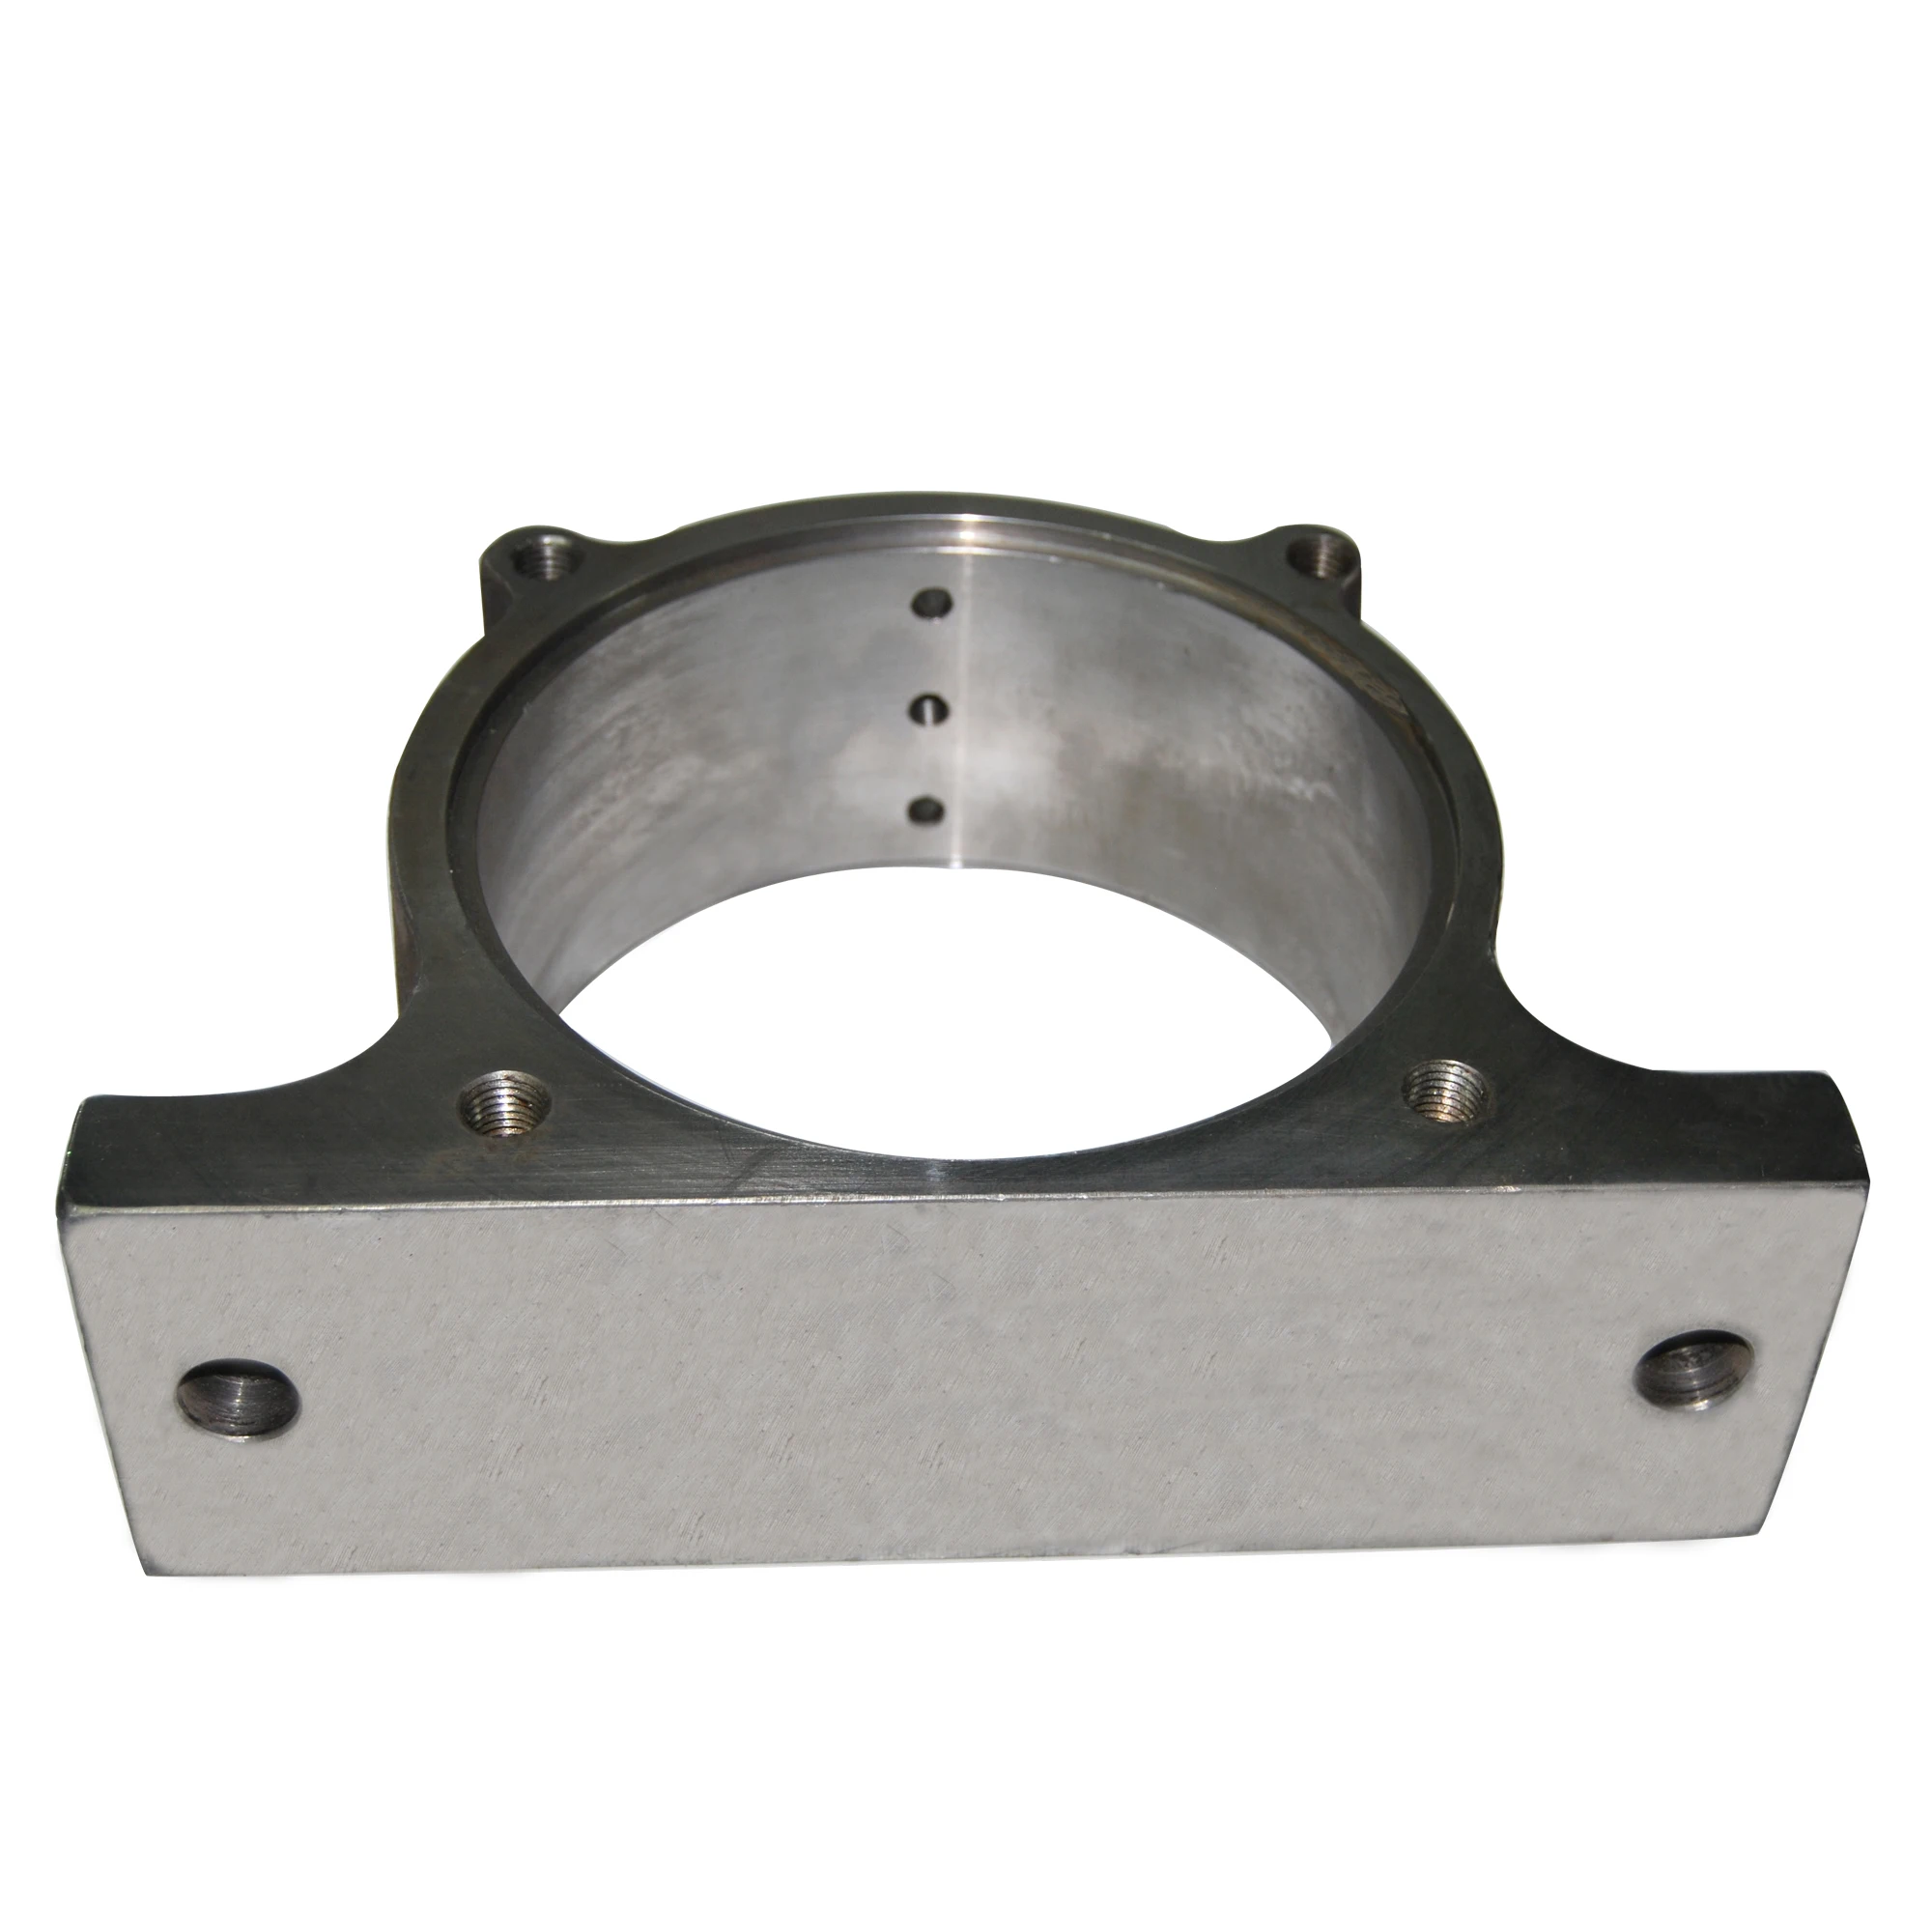 
Cast Precision Flange Housing Pillow Block Bearing Seat Cover  (1600097651033)